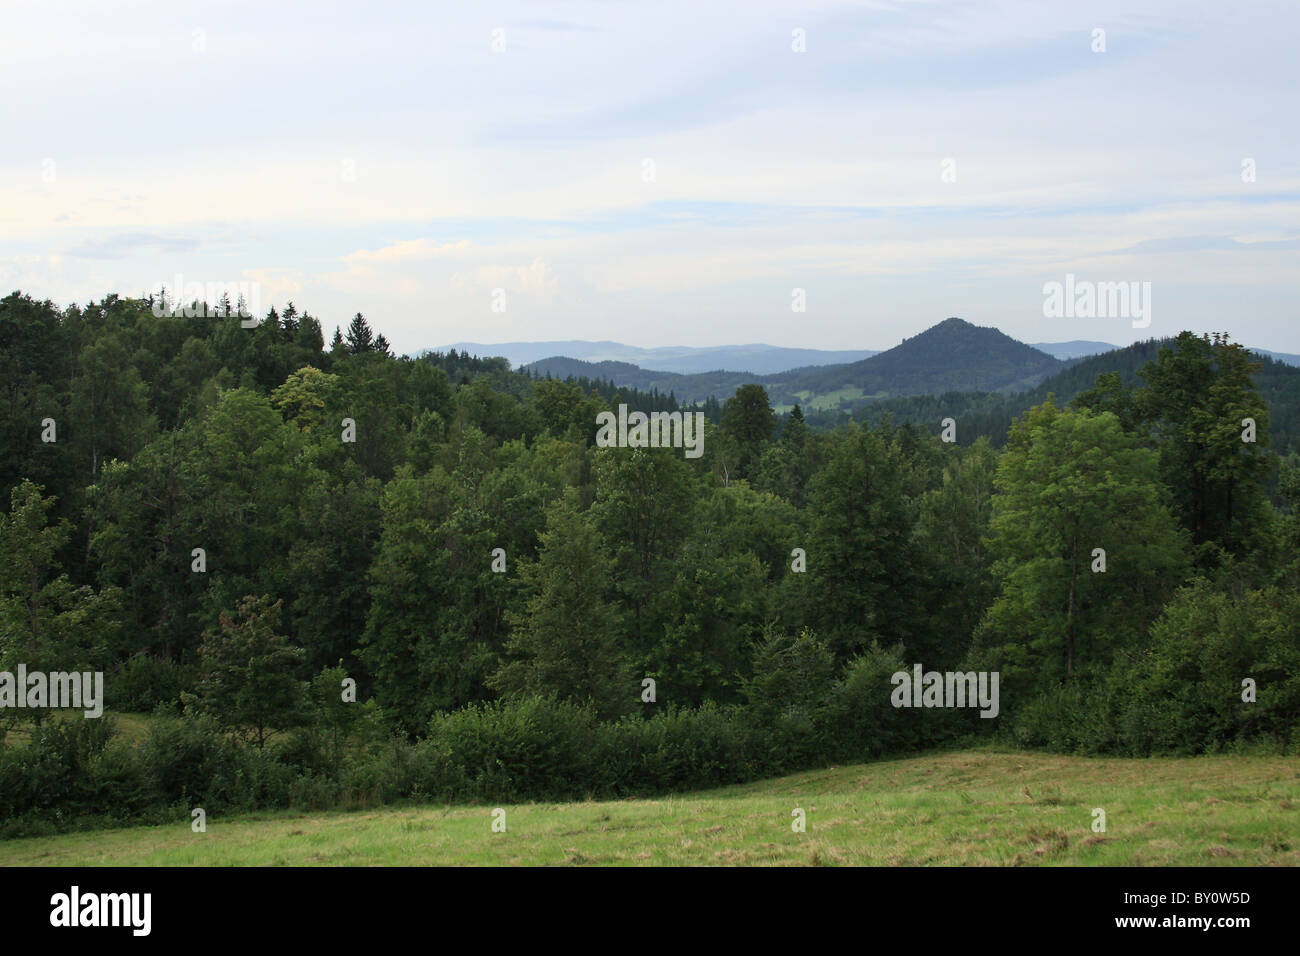 The Rudawy Janowickie - a mountain range in Western Sudetes in Poland. Stock Photo